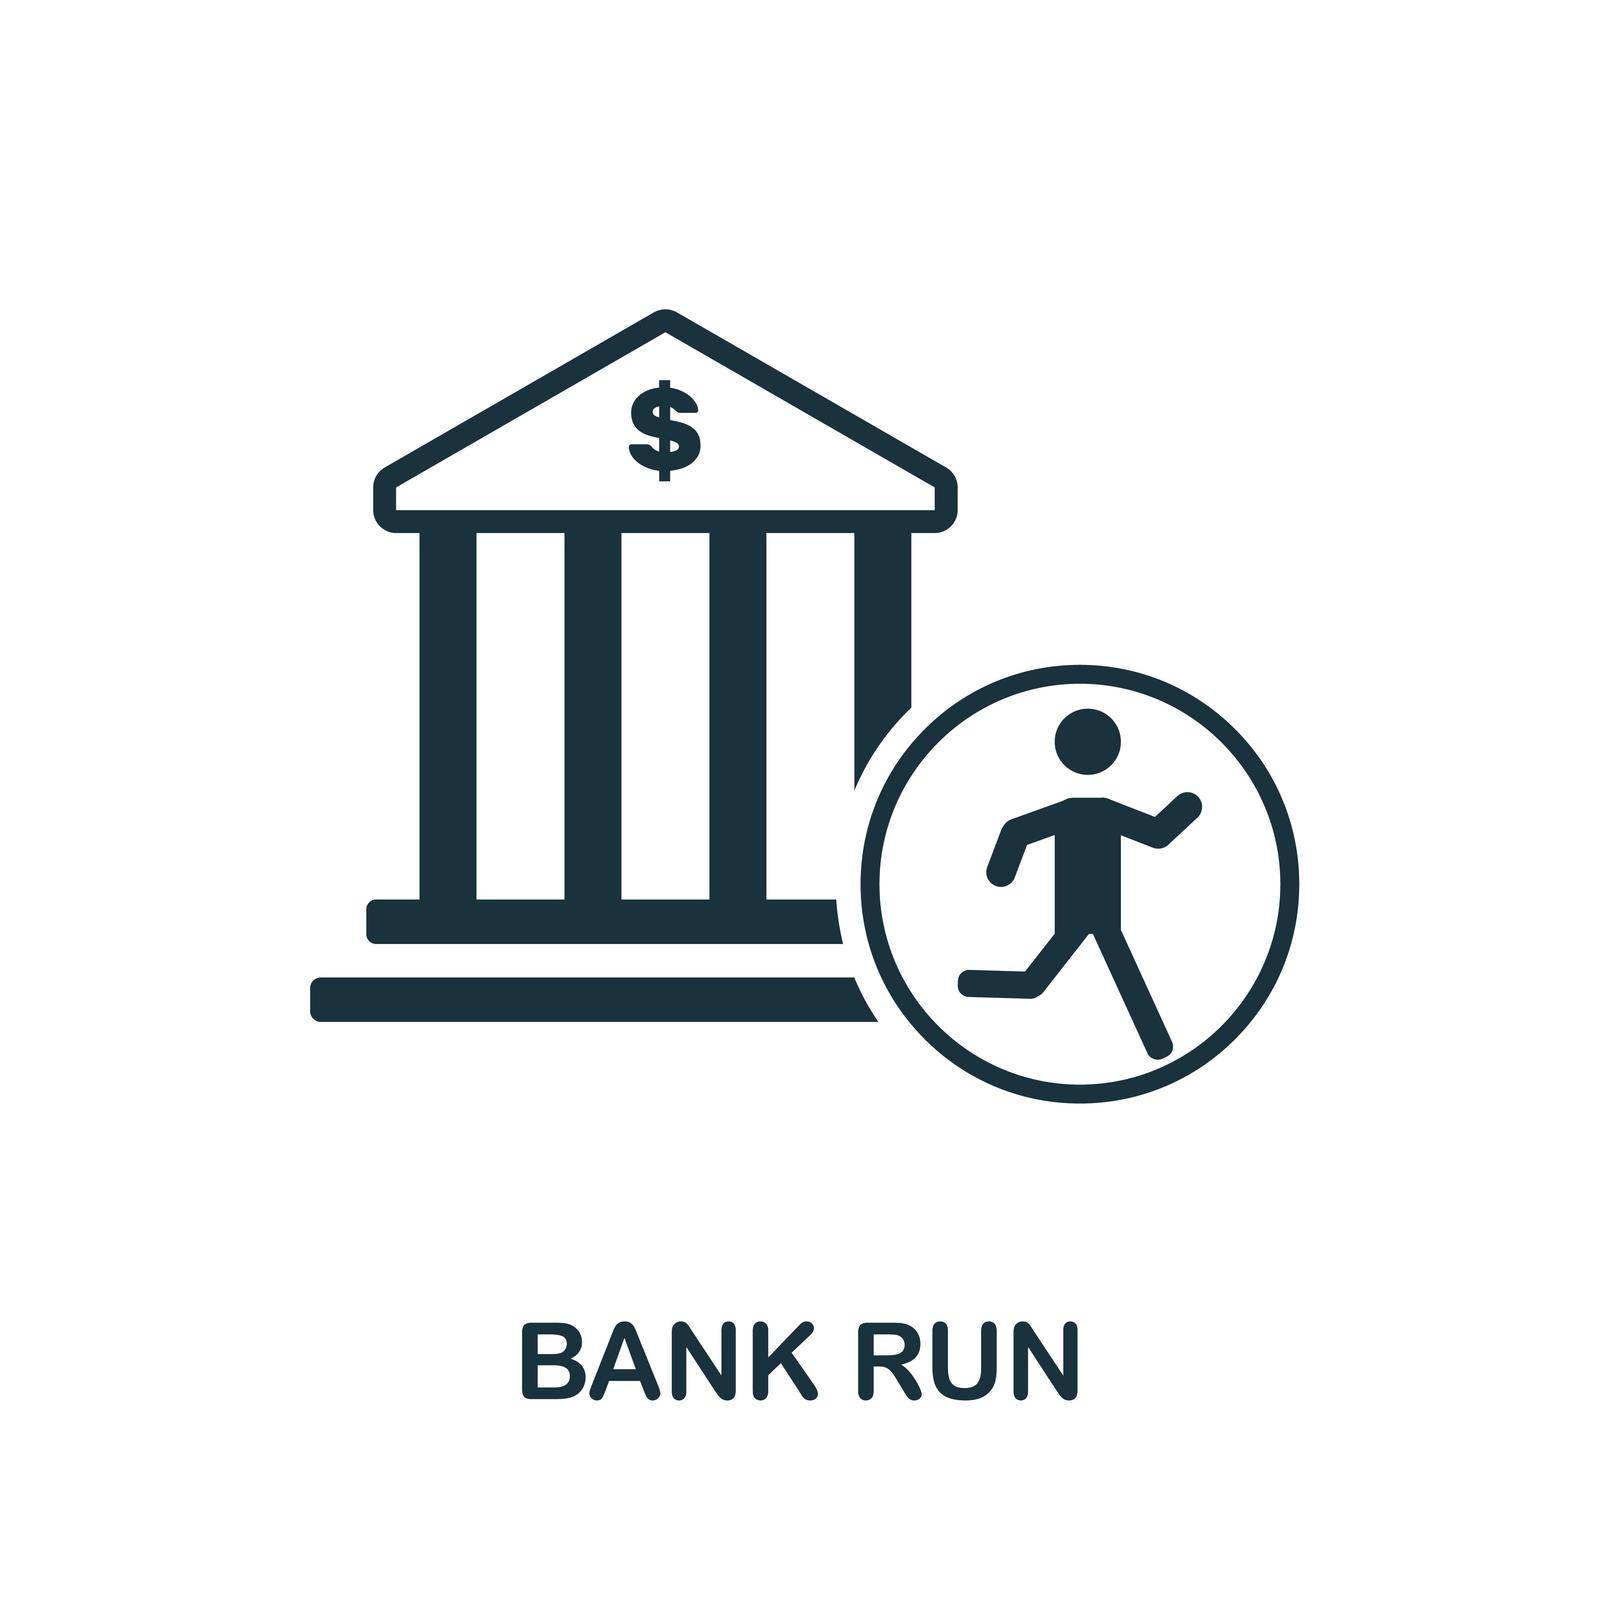 Bank Run icon. Black sign from economic crisis collection. Creative Bank Run icon for web design, templates and infographics.